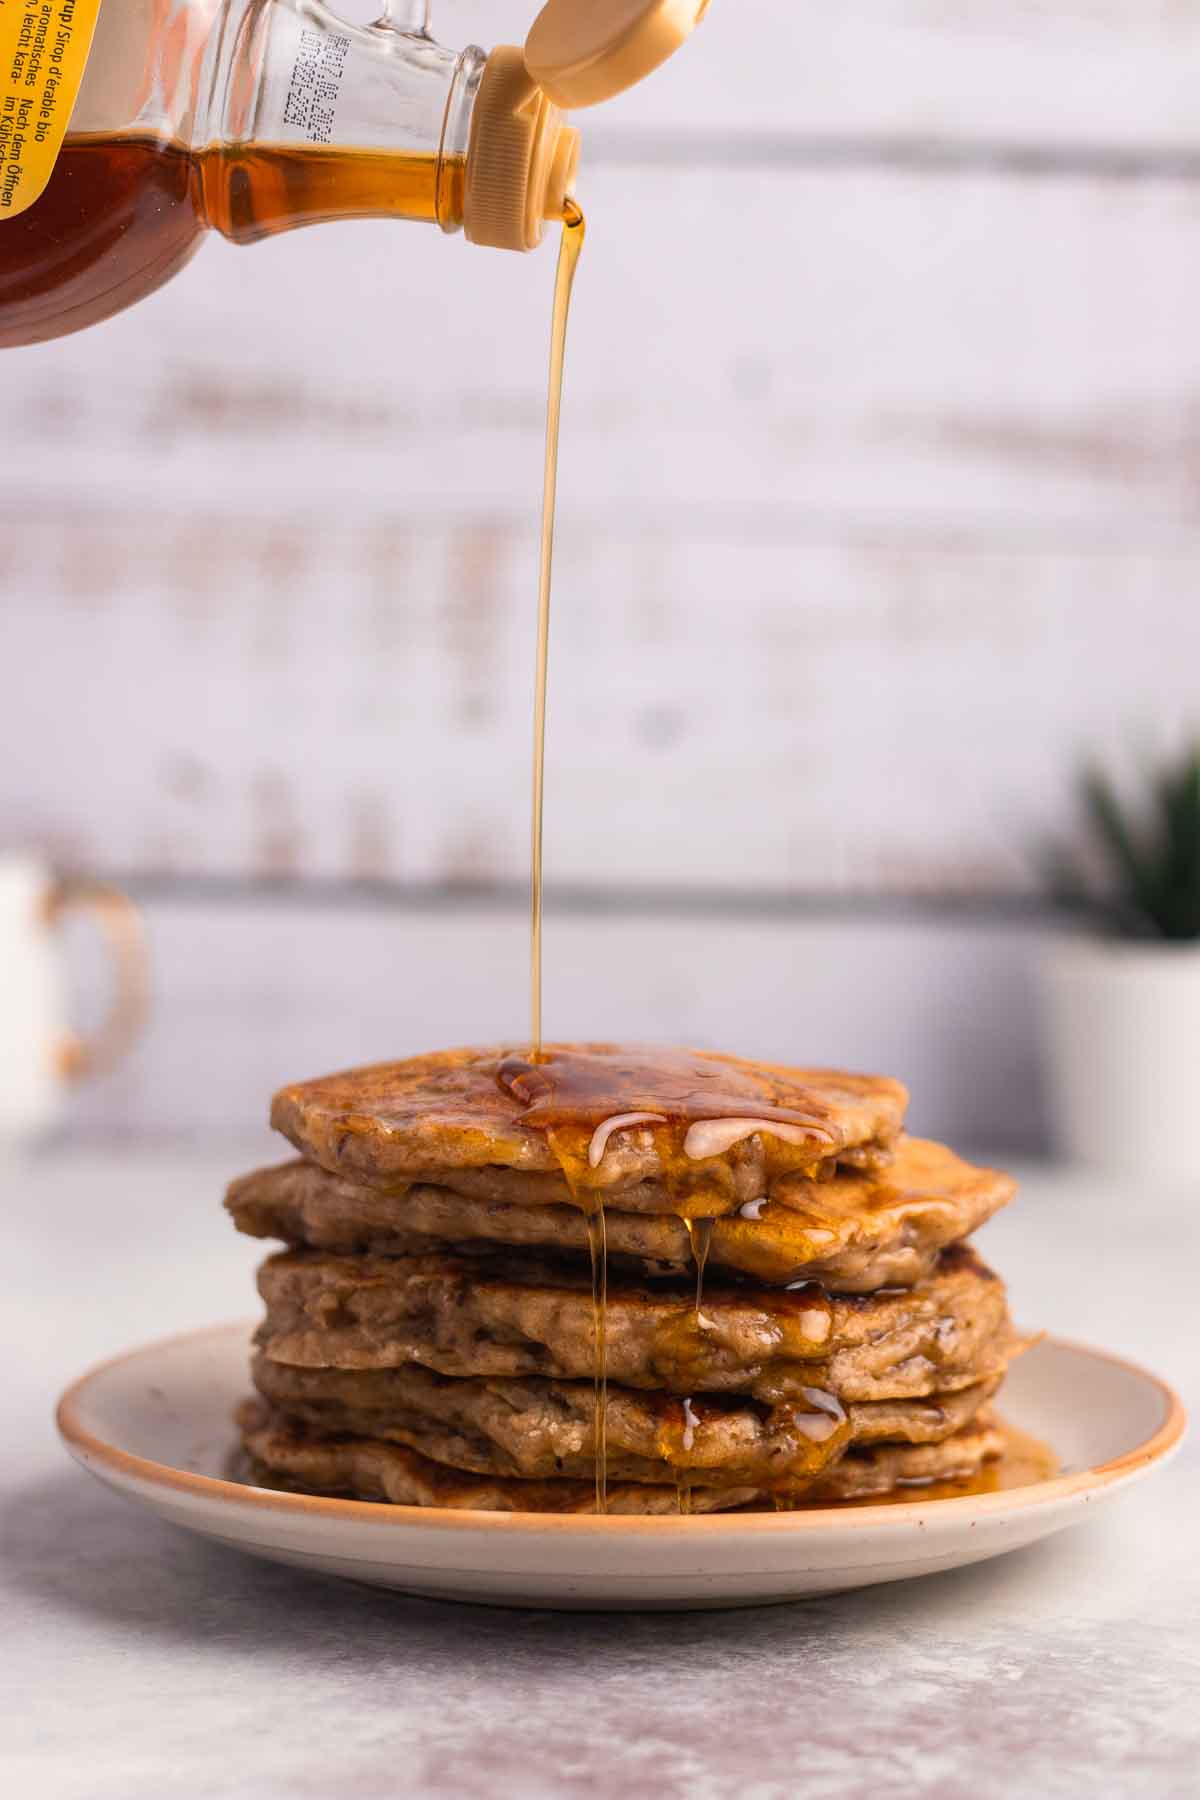 Maple syrup is poured over a stack of vegan banana pancakes.